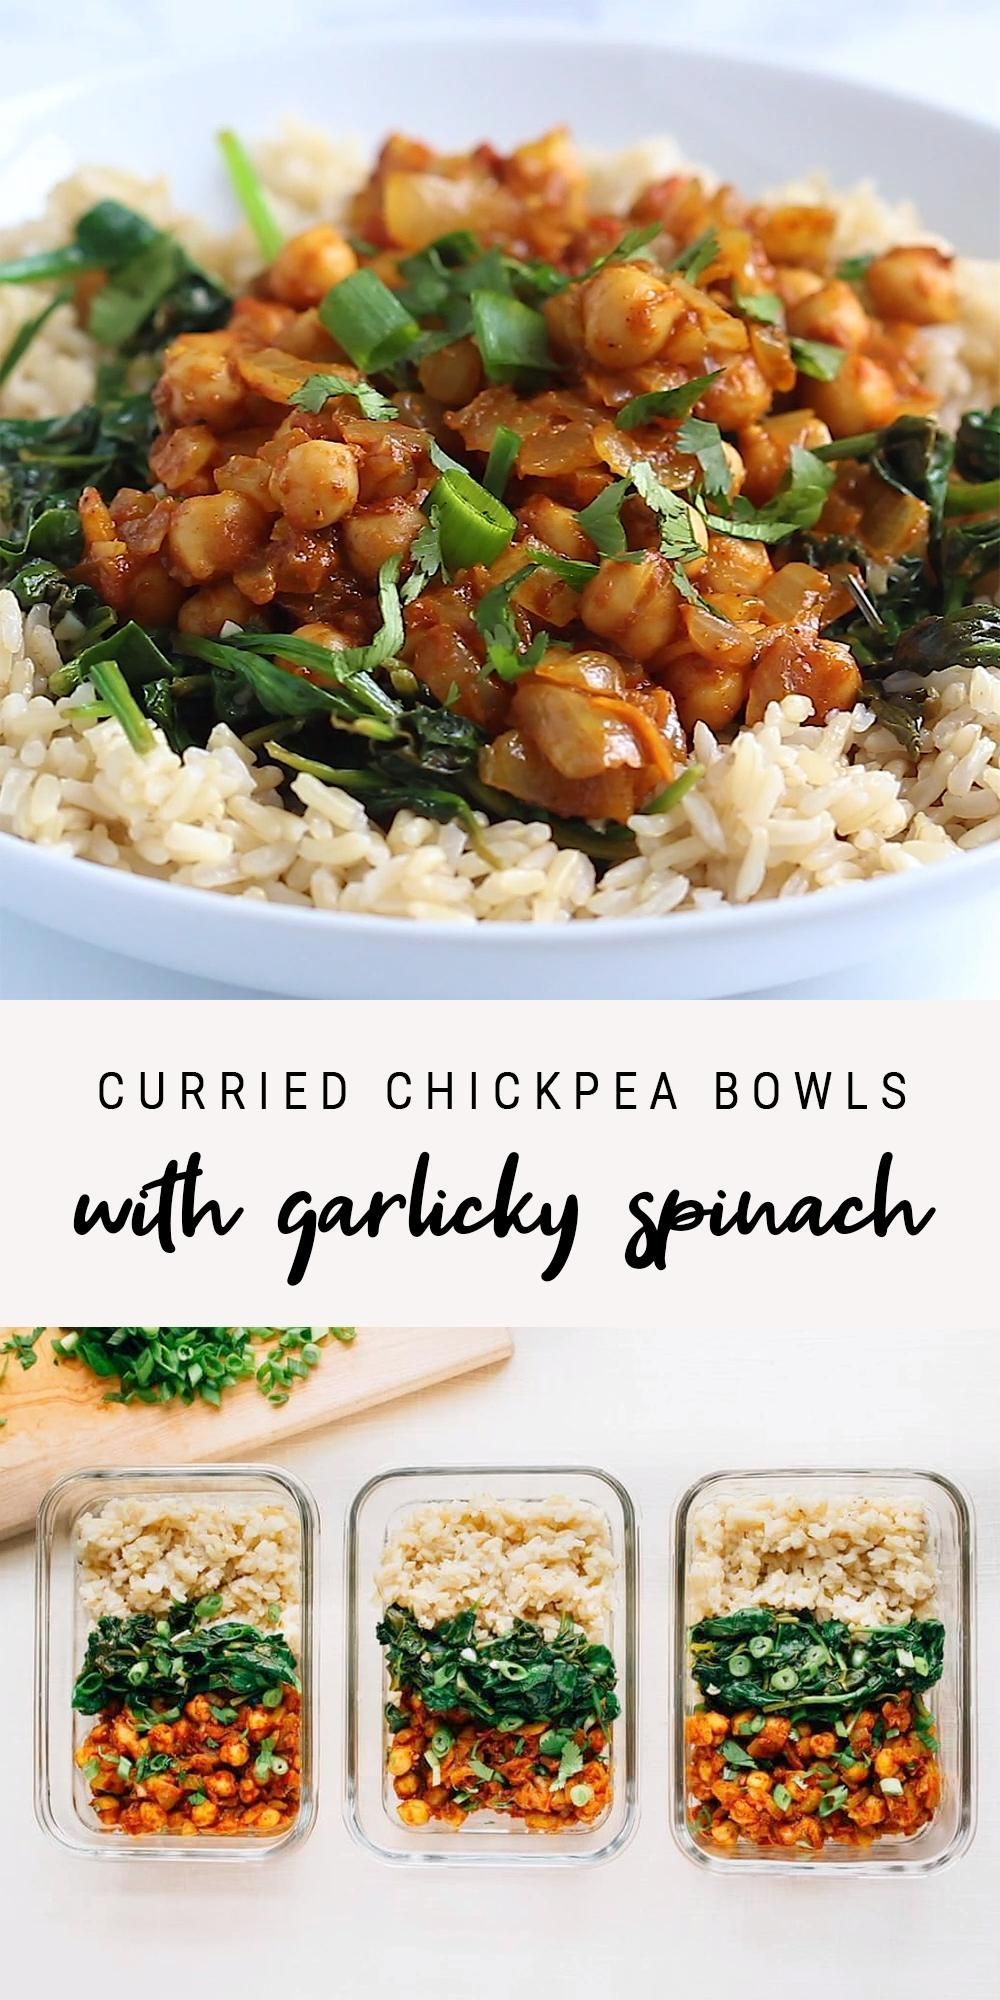 Vegan Curried Chickpea Bowls with Garlicky Spinach | Meal Prep - Vegan Curried Chickpea Bowls with Garlicky Spinach | Meal Prep -   25 meal prep recipes vegetarian videos ideas